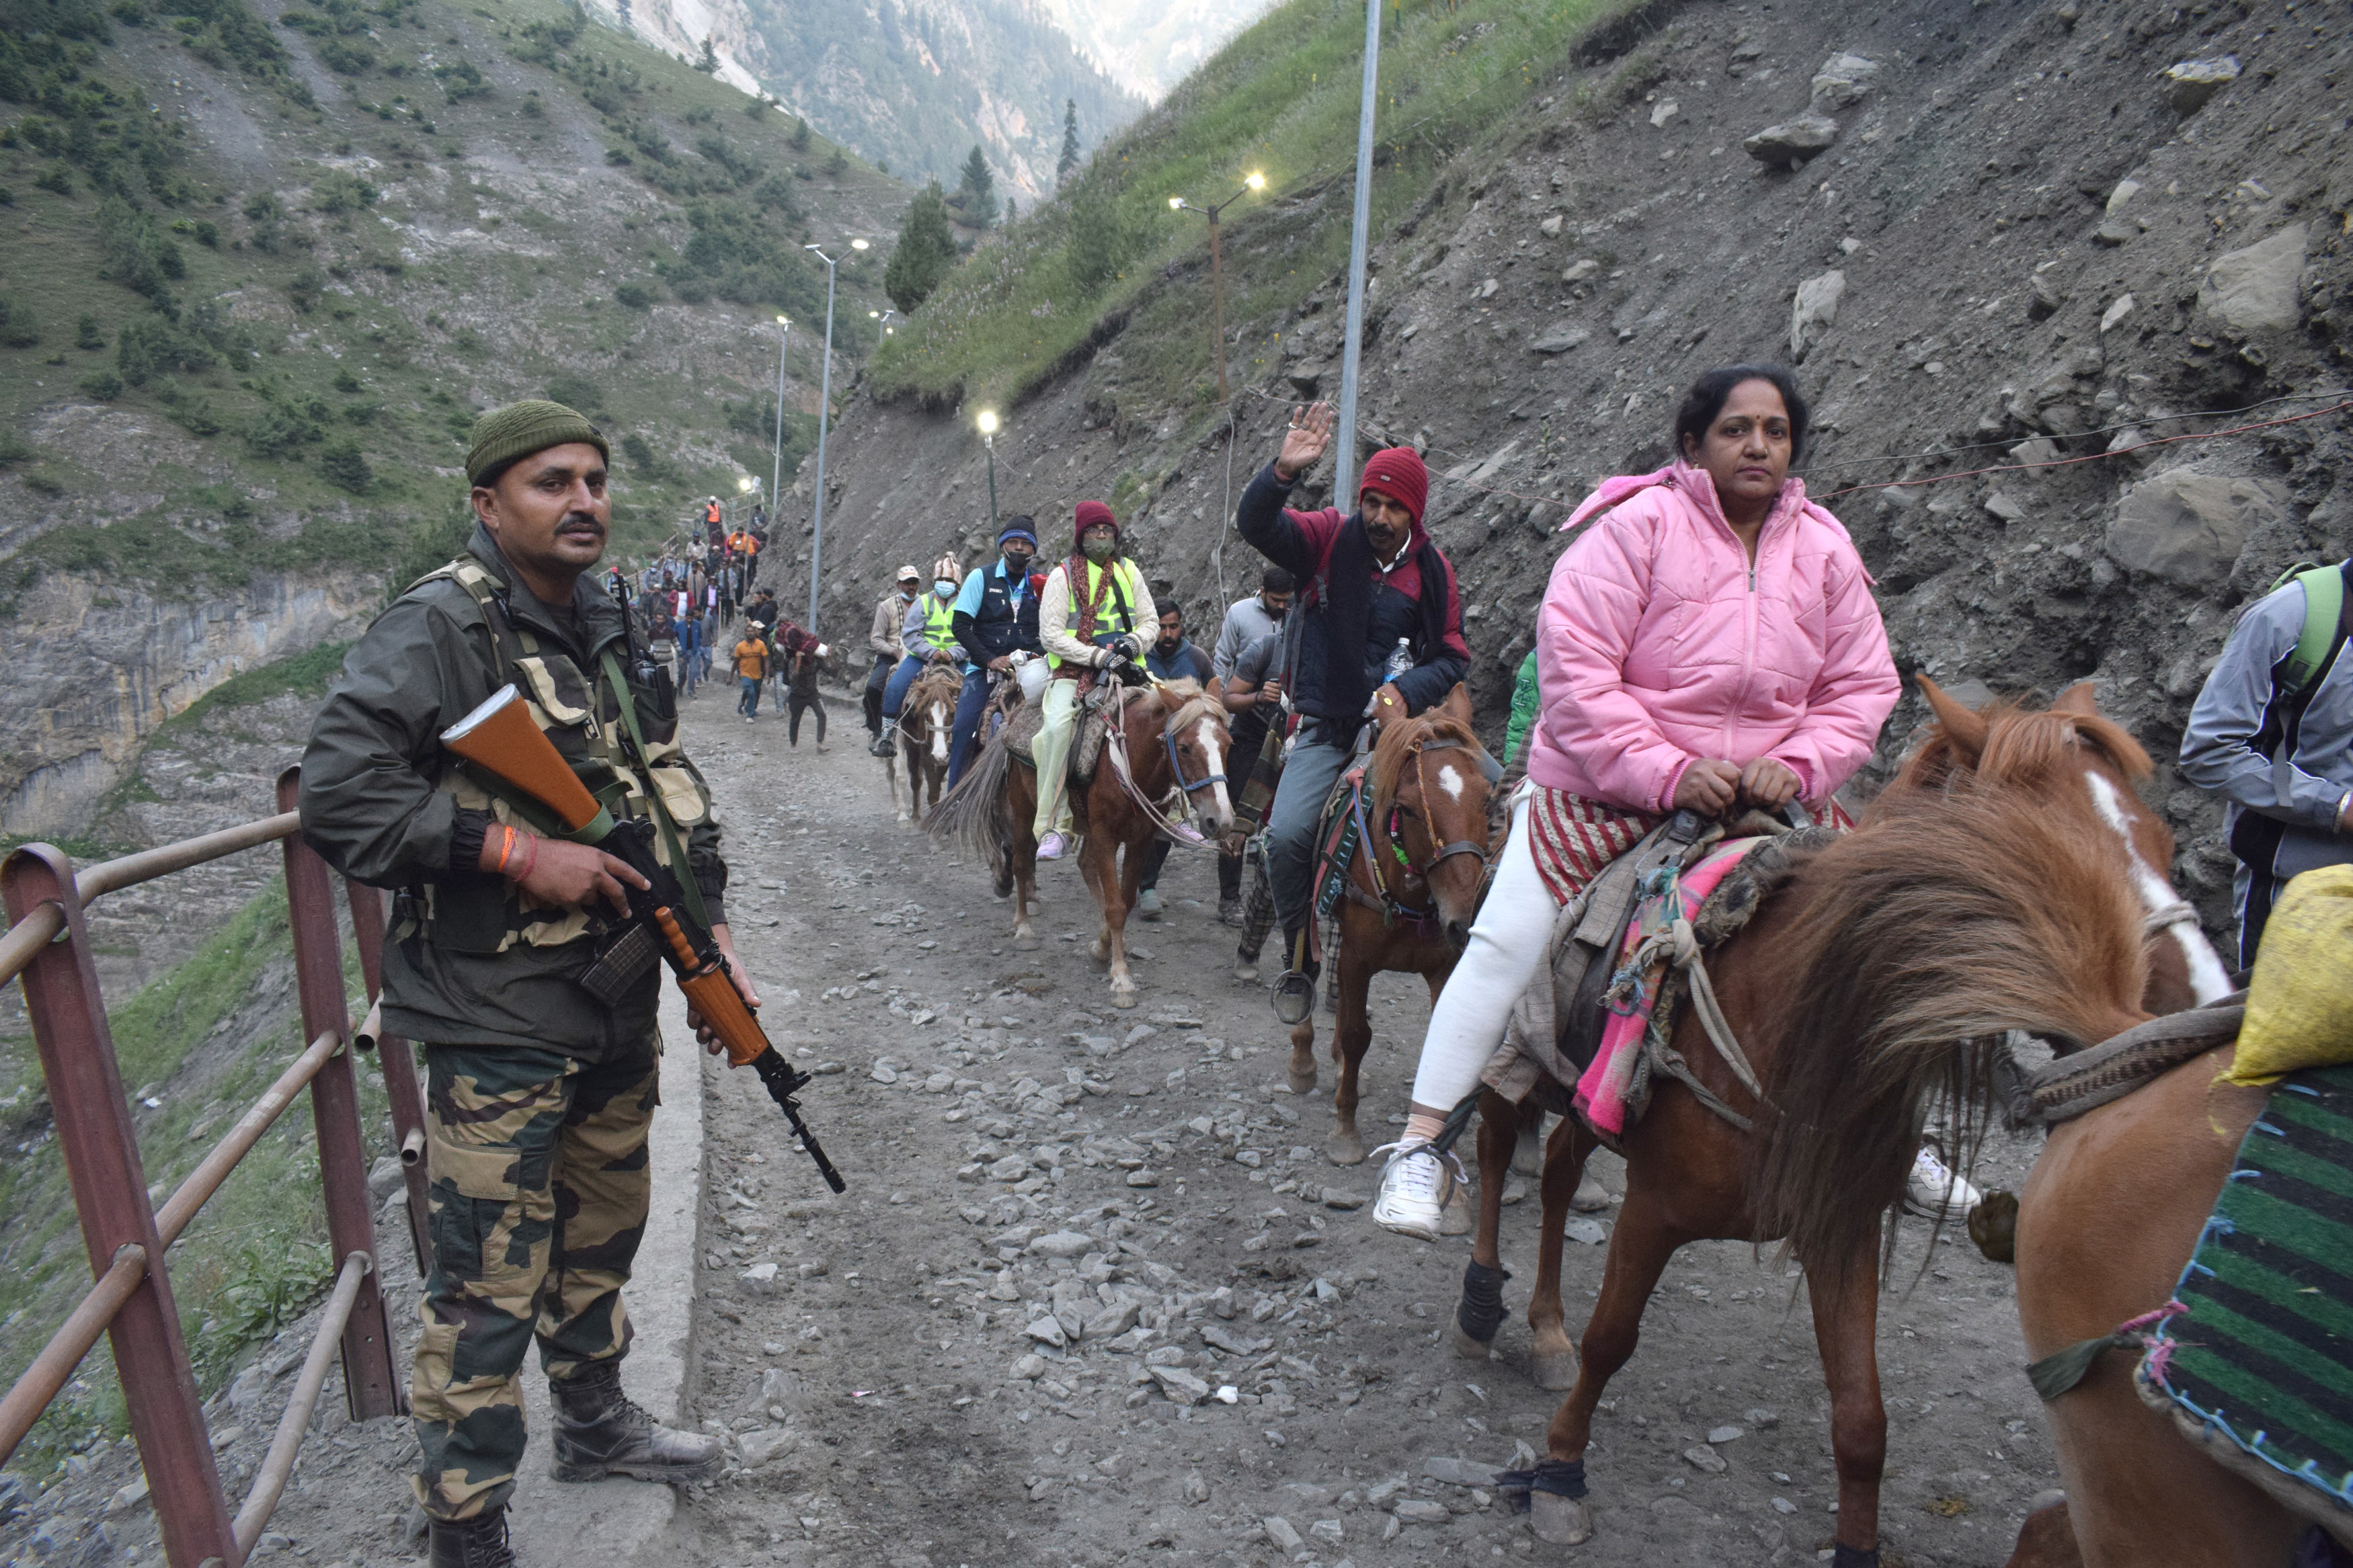 Pilgrims on the way to the Holy cave of Amarnath